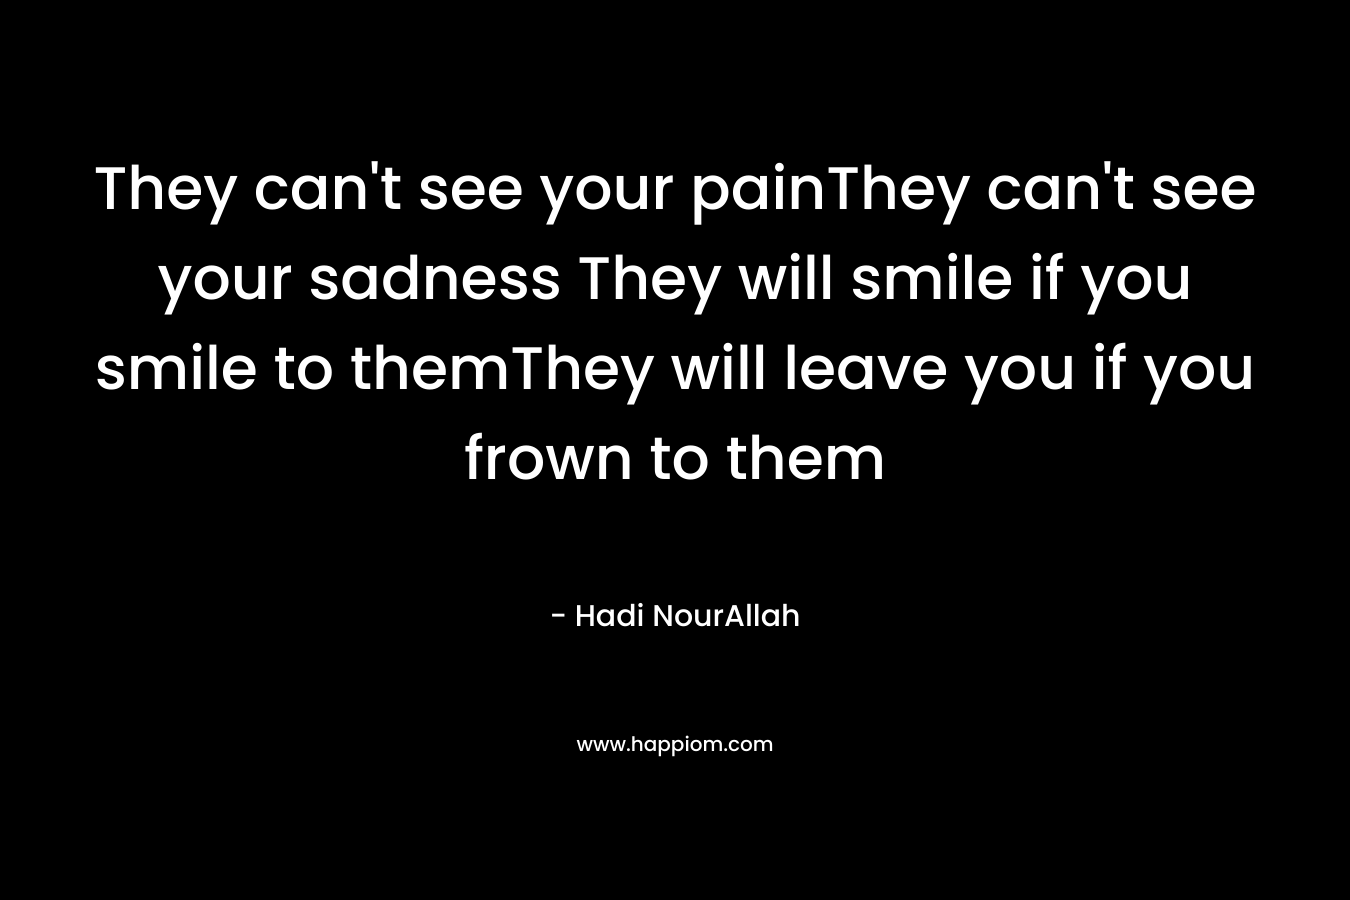 They can’t see your painThey can’t see your sadness They will smile if you smile to themThey will leave you if you frown to them – Hadi NourAllah